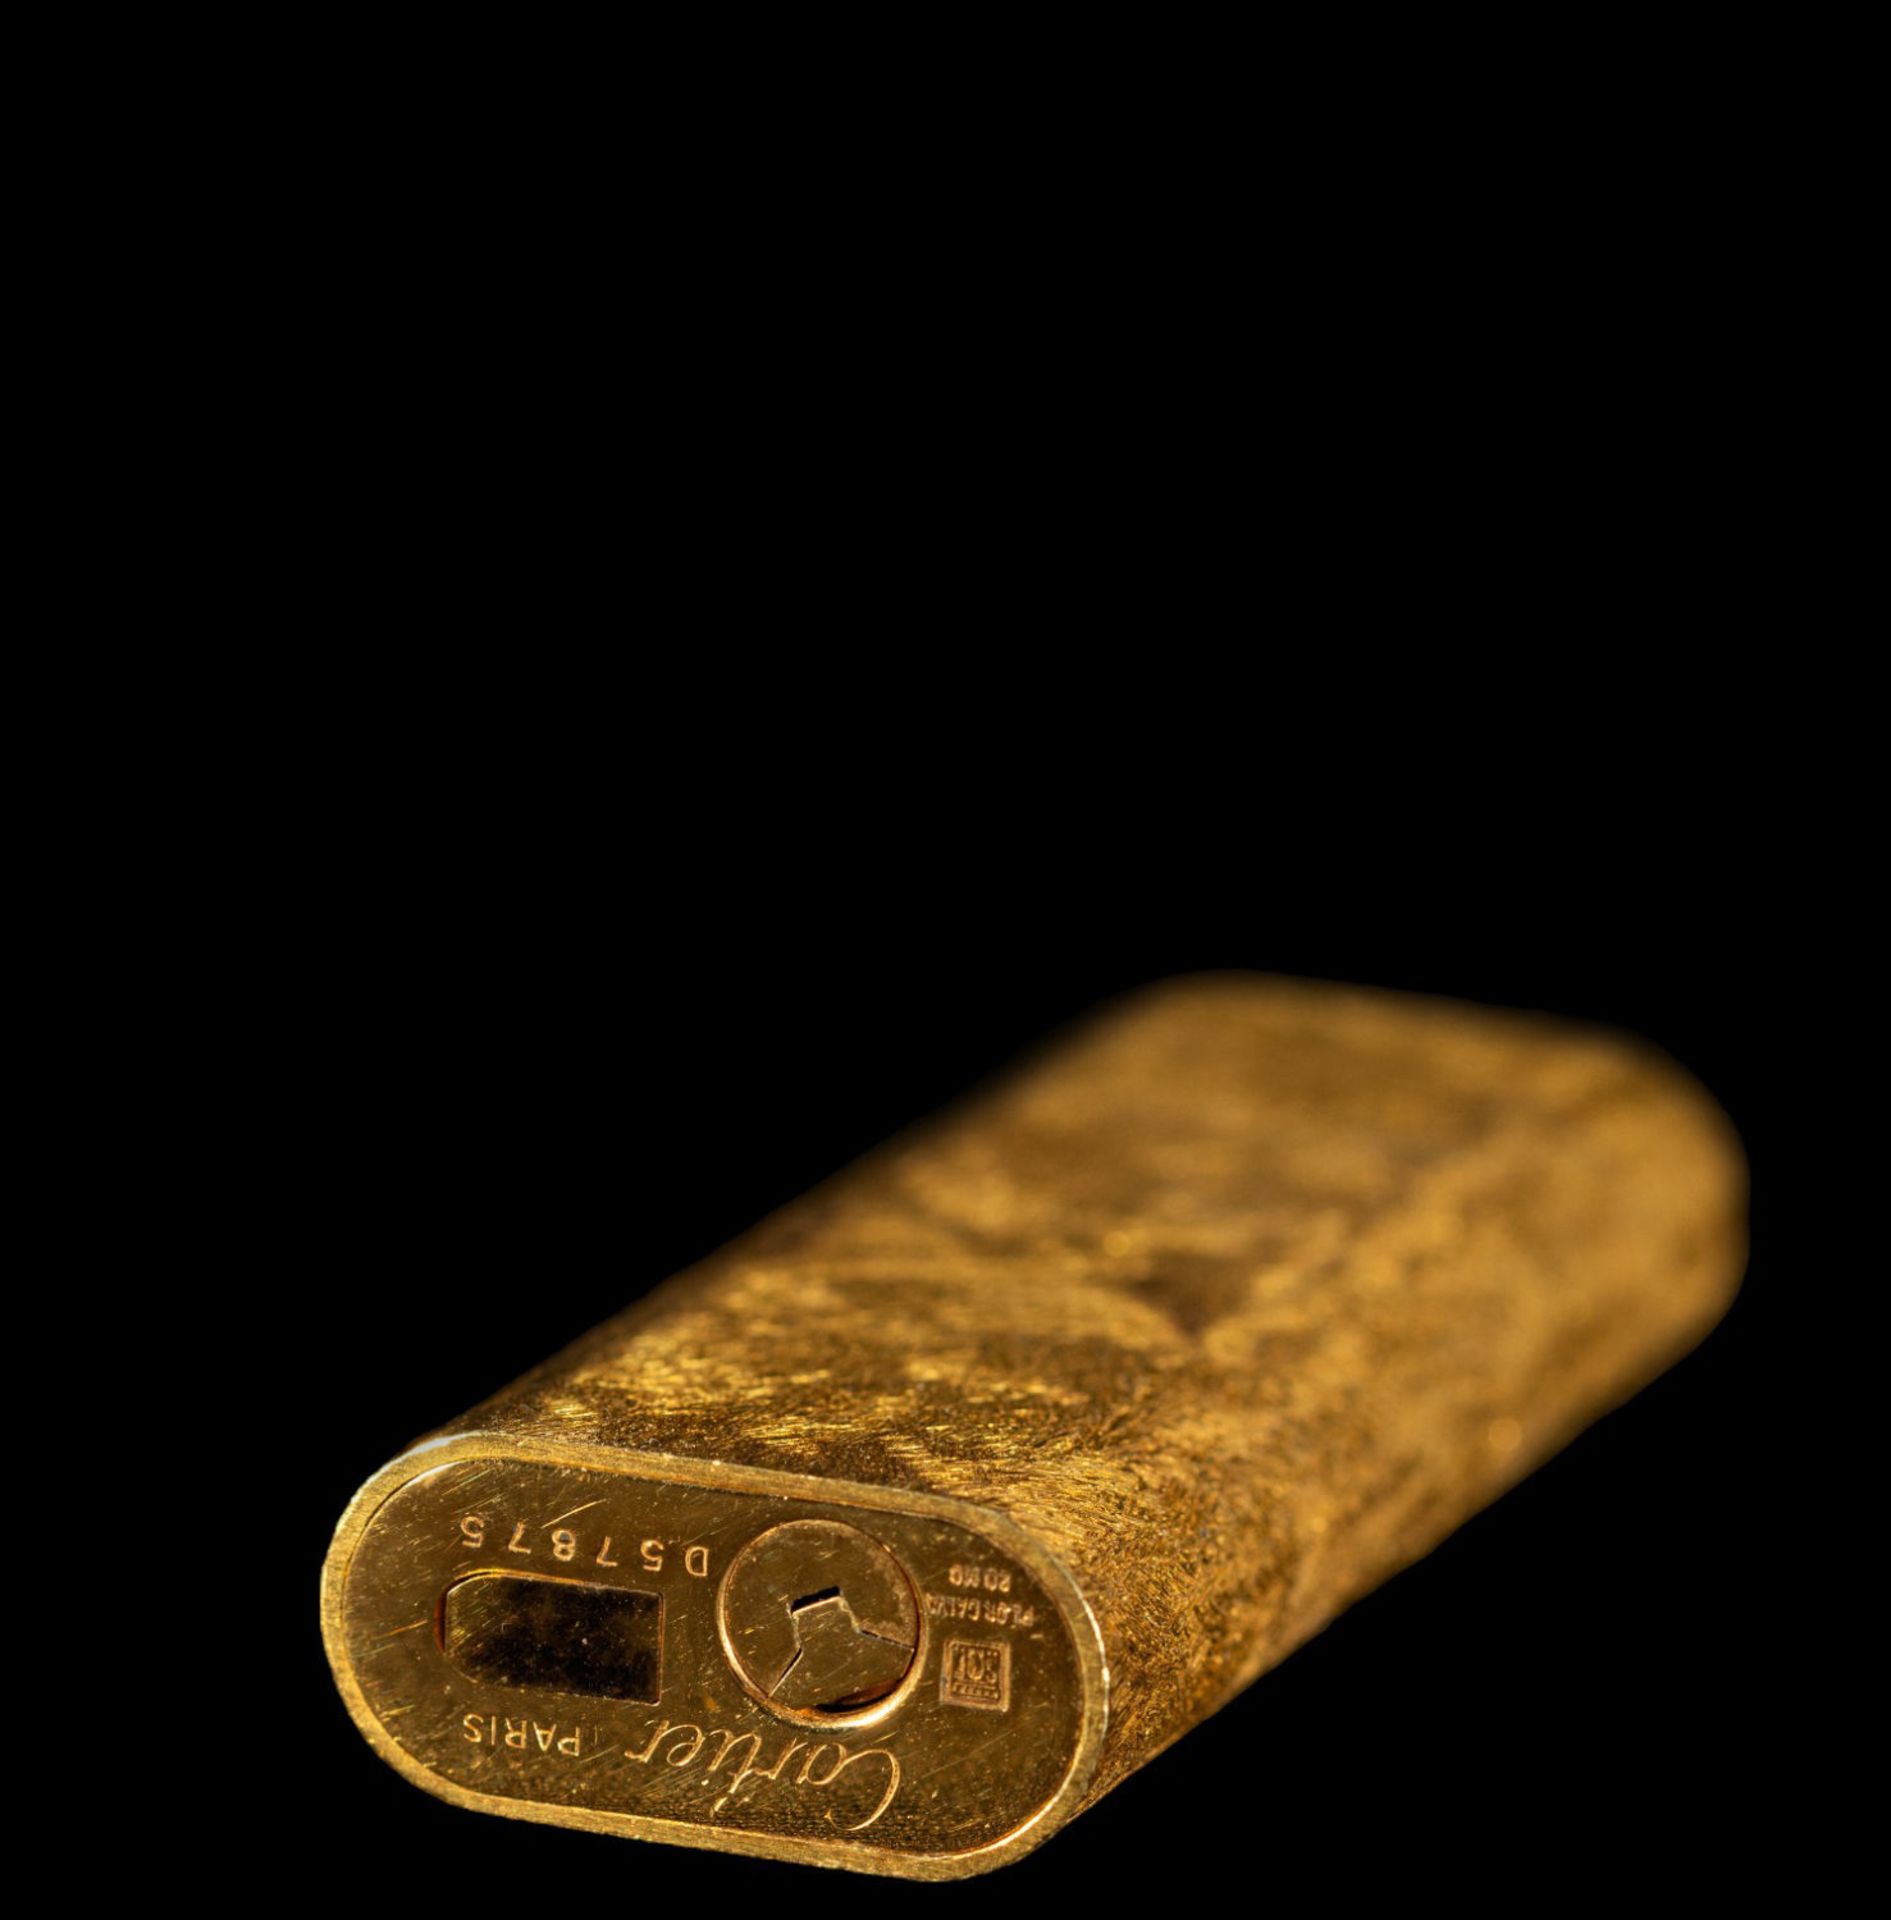 Cartier lighter in 20 micron gold plated, 1970s - Image 3 of 3